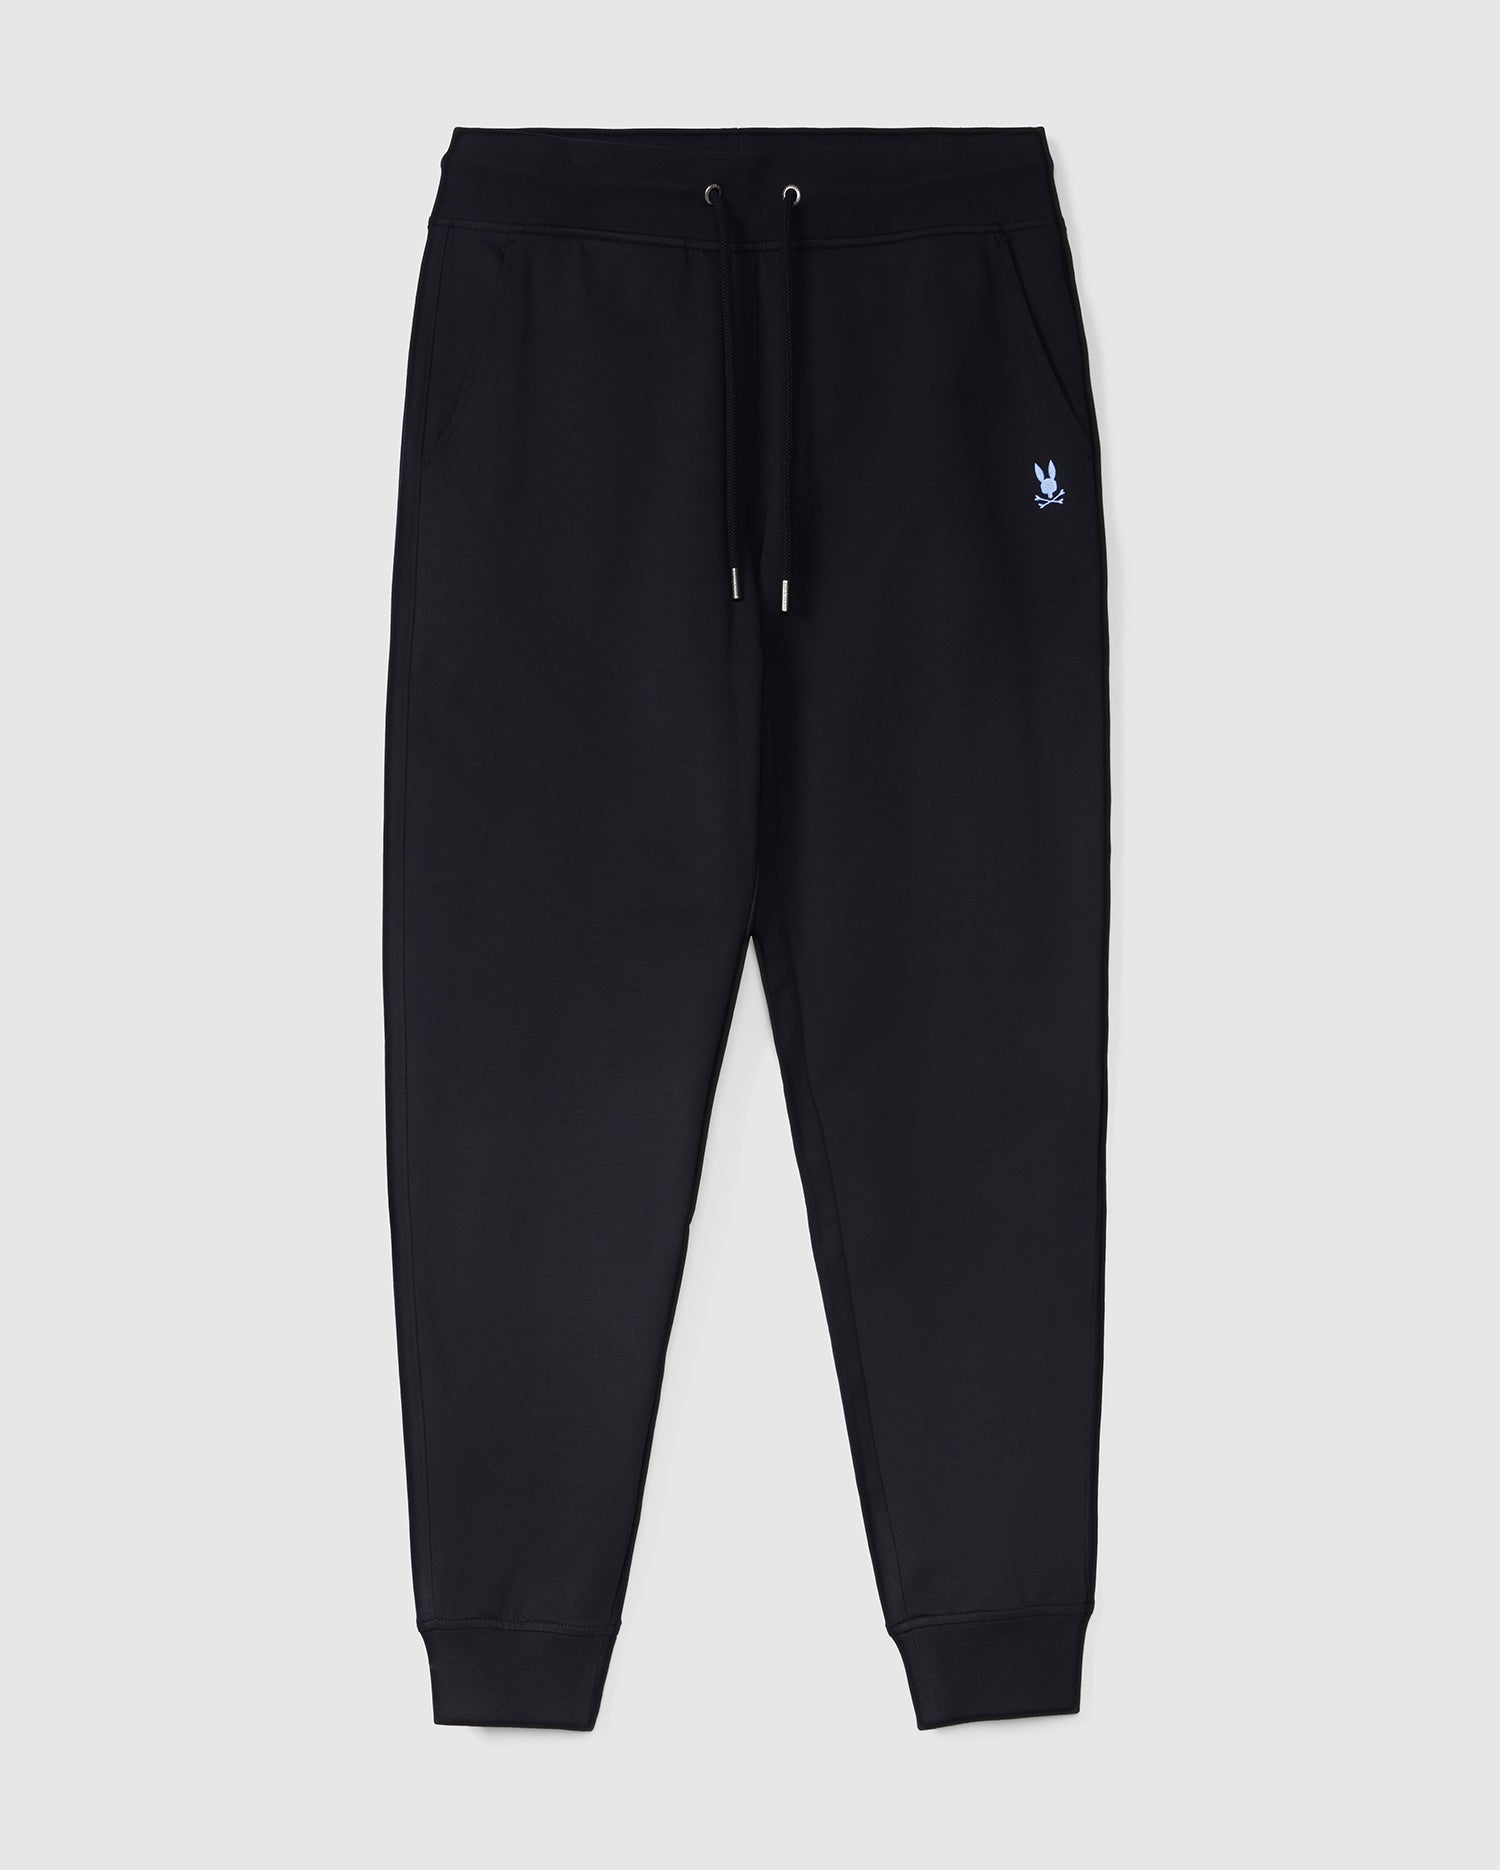 Buy Psycho Bunny Bennett Big & Tall Sweatpant at In Style –  InStyle-Tuscaloosa